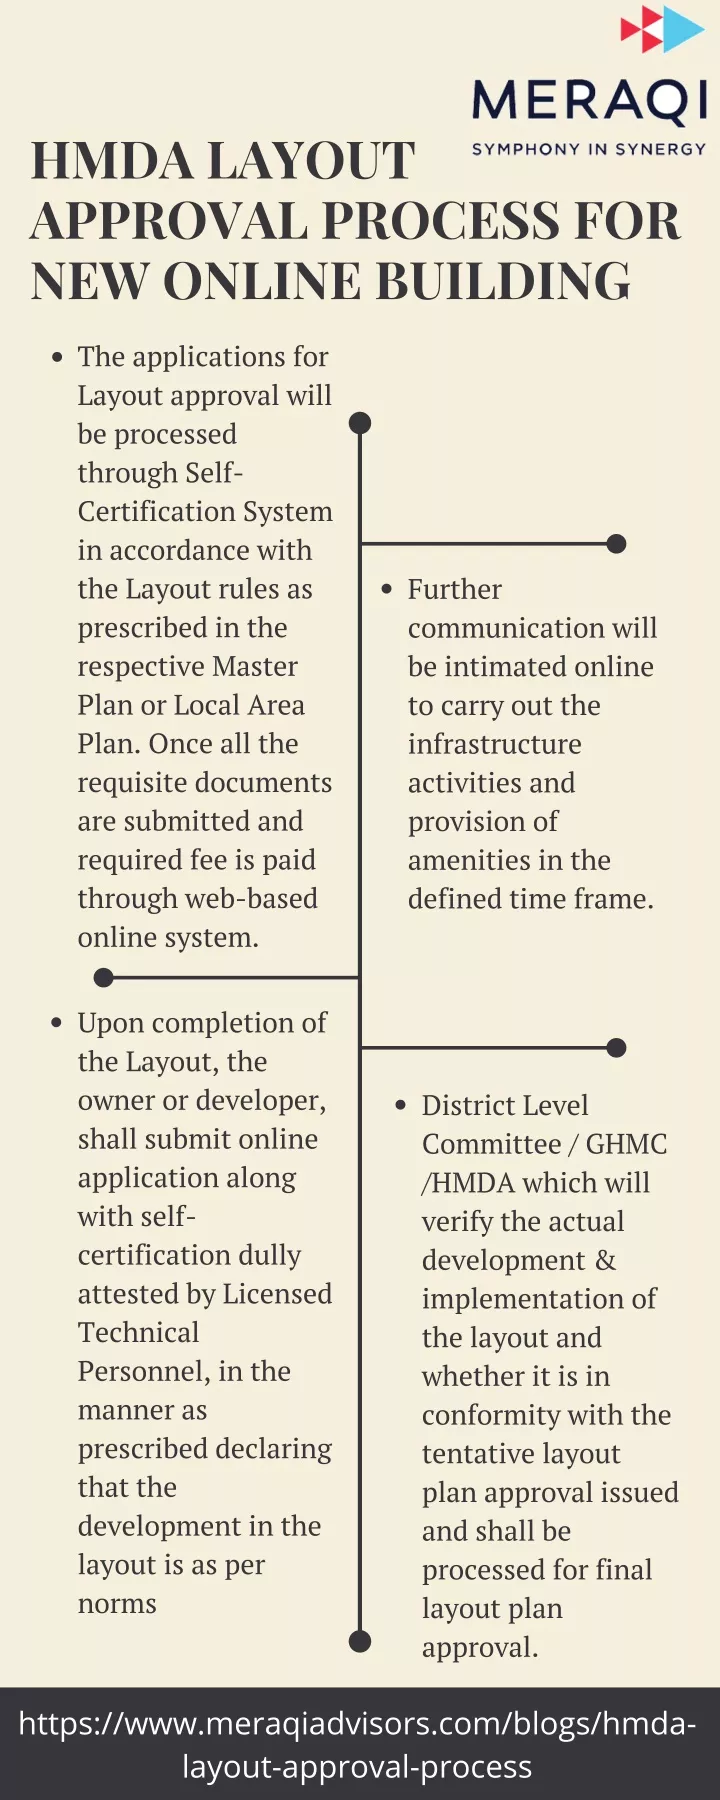 hmda layout approval process for new online